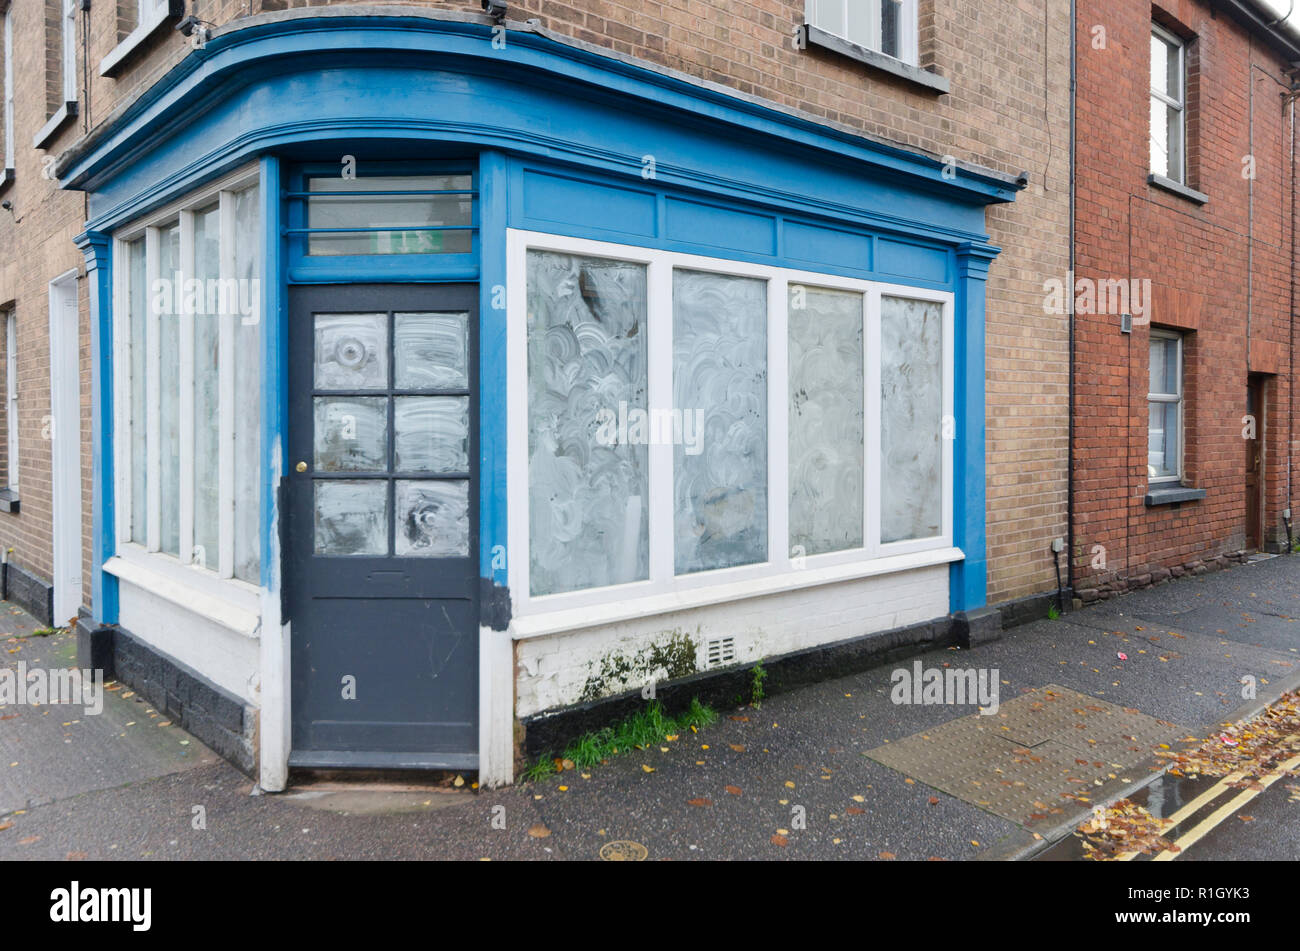 Traditional corner shop out of business closed with windows whitewashed. Stock Photo